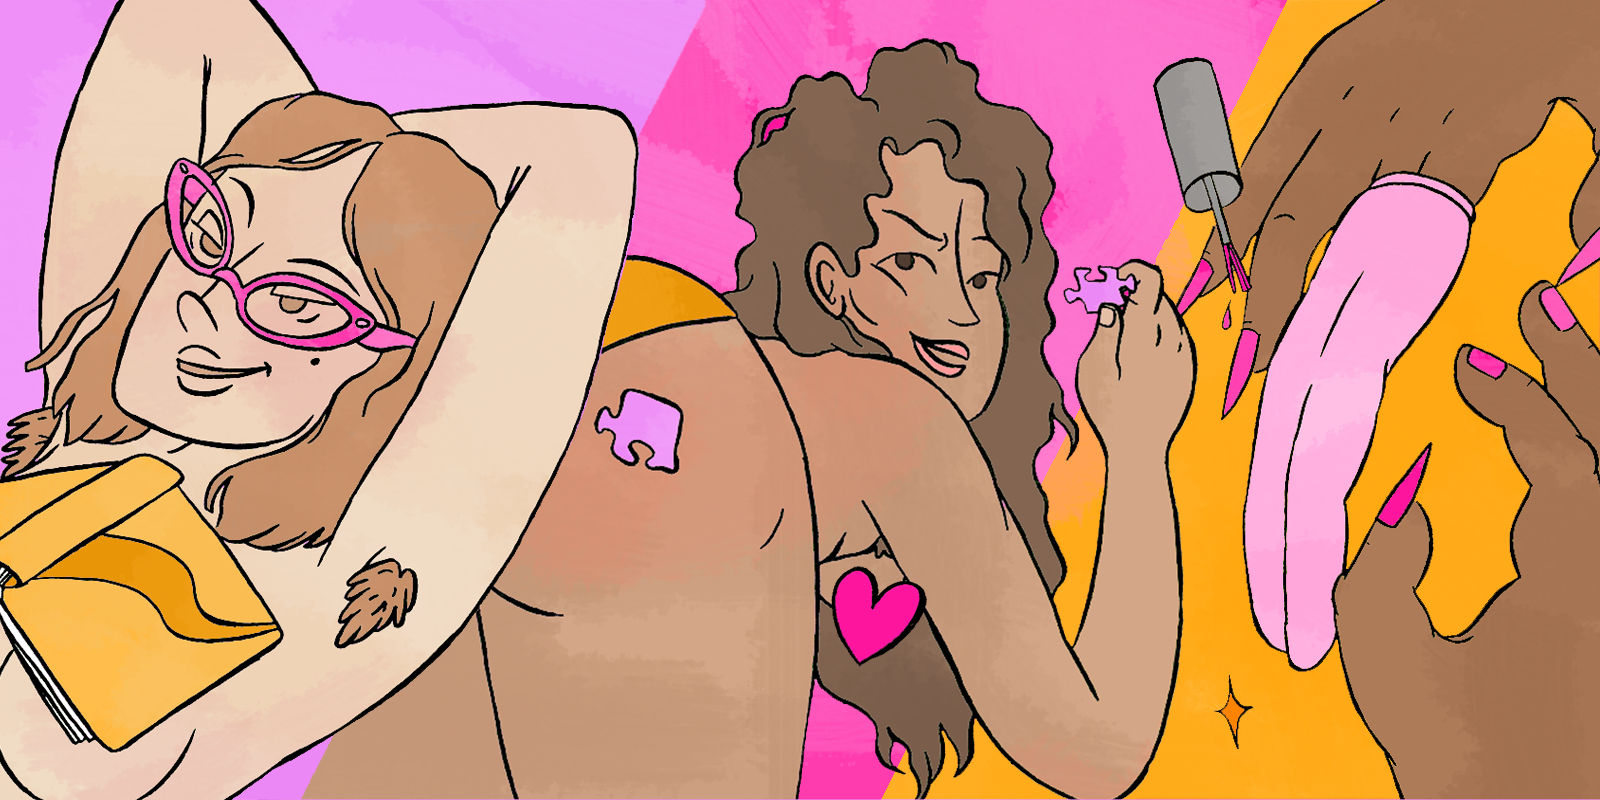 a triptych featuring three queer people in sexy situations - frame one is a girl laying back with her arms behind her head and a book on her chest, frame two is a person on their knees, holding up a puzzle piece with their butt in the air, frame 3 is two hands with painted fingernails, one of the hands has on a finger extender